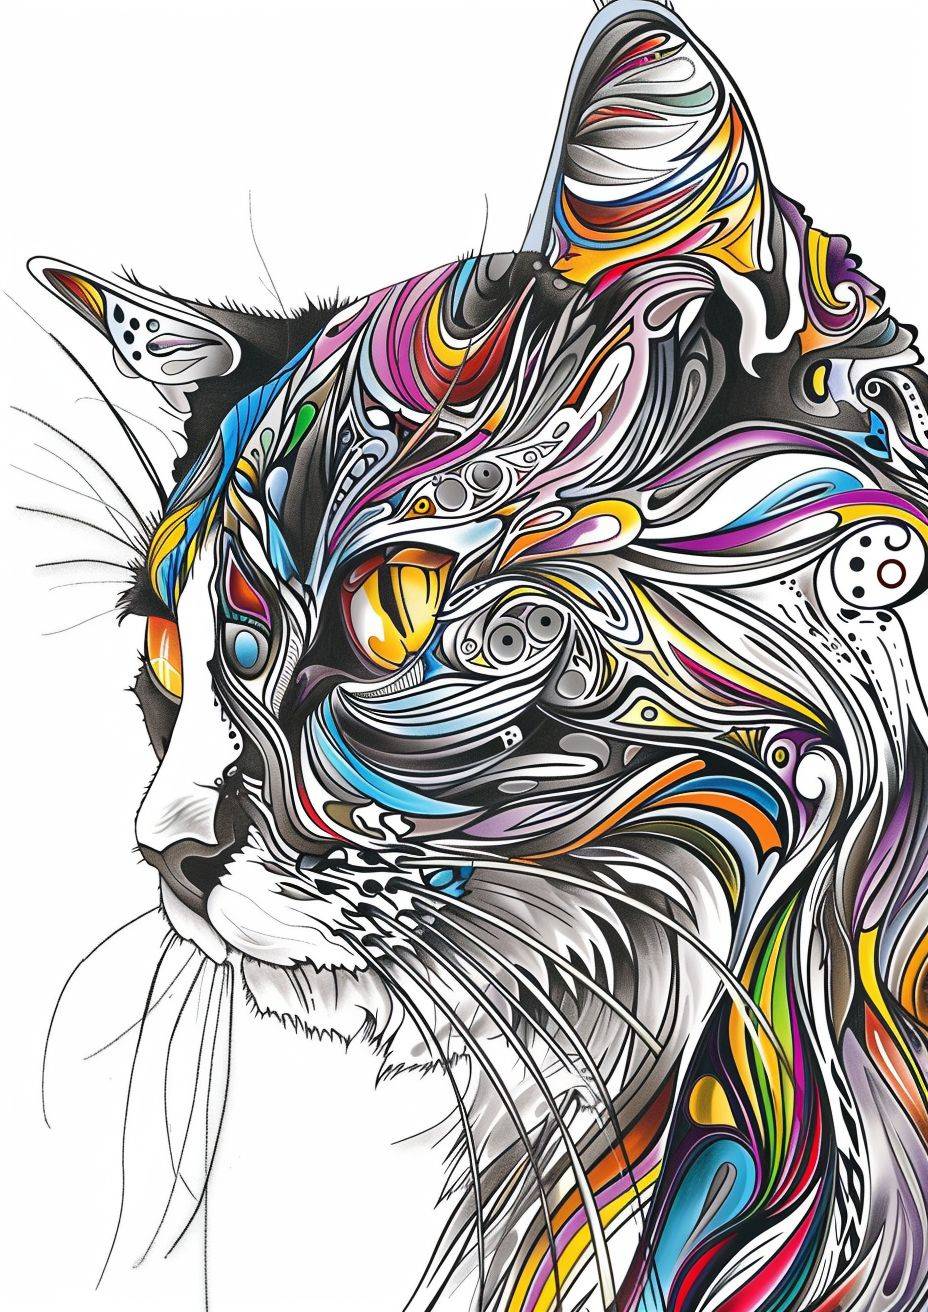 Please create an adult colouring book, please use only the color of white and black. Create realistic and artistically expressive portraits of animals. Capture the vibrant colors and intricate details that make each animal unique. Whether it's a home cat, Siamese, bring out the essence of each creature in a way that is both visually stunning and emotionally resonant. Use a diverse color palette and experiment with artistic styles to convey the diversity and beauty of the animal kingdom. Let your creativity flow and evoke a sense of awe and appreciation for the natural world through these animal portraits